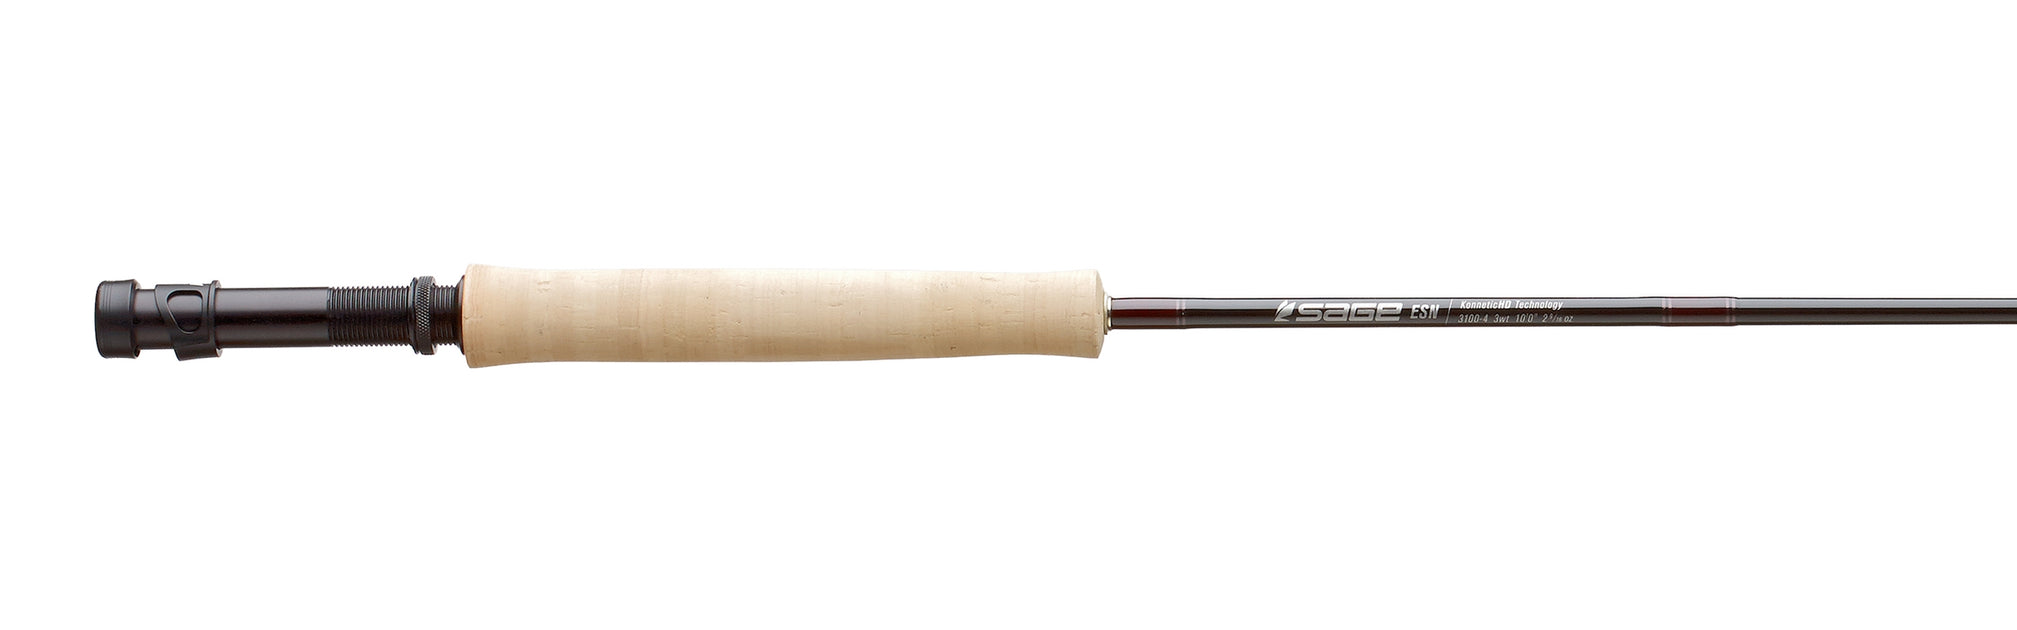 Sage ESN II Rods - European Style Nymping Fly Rods